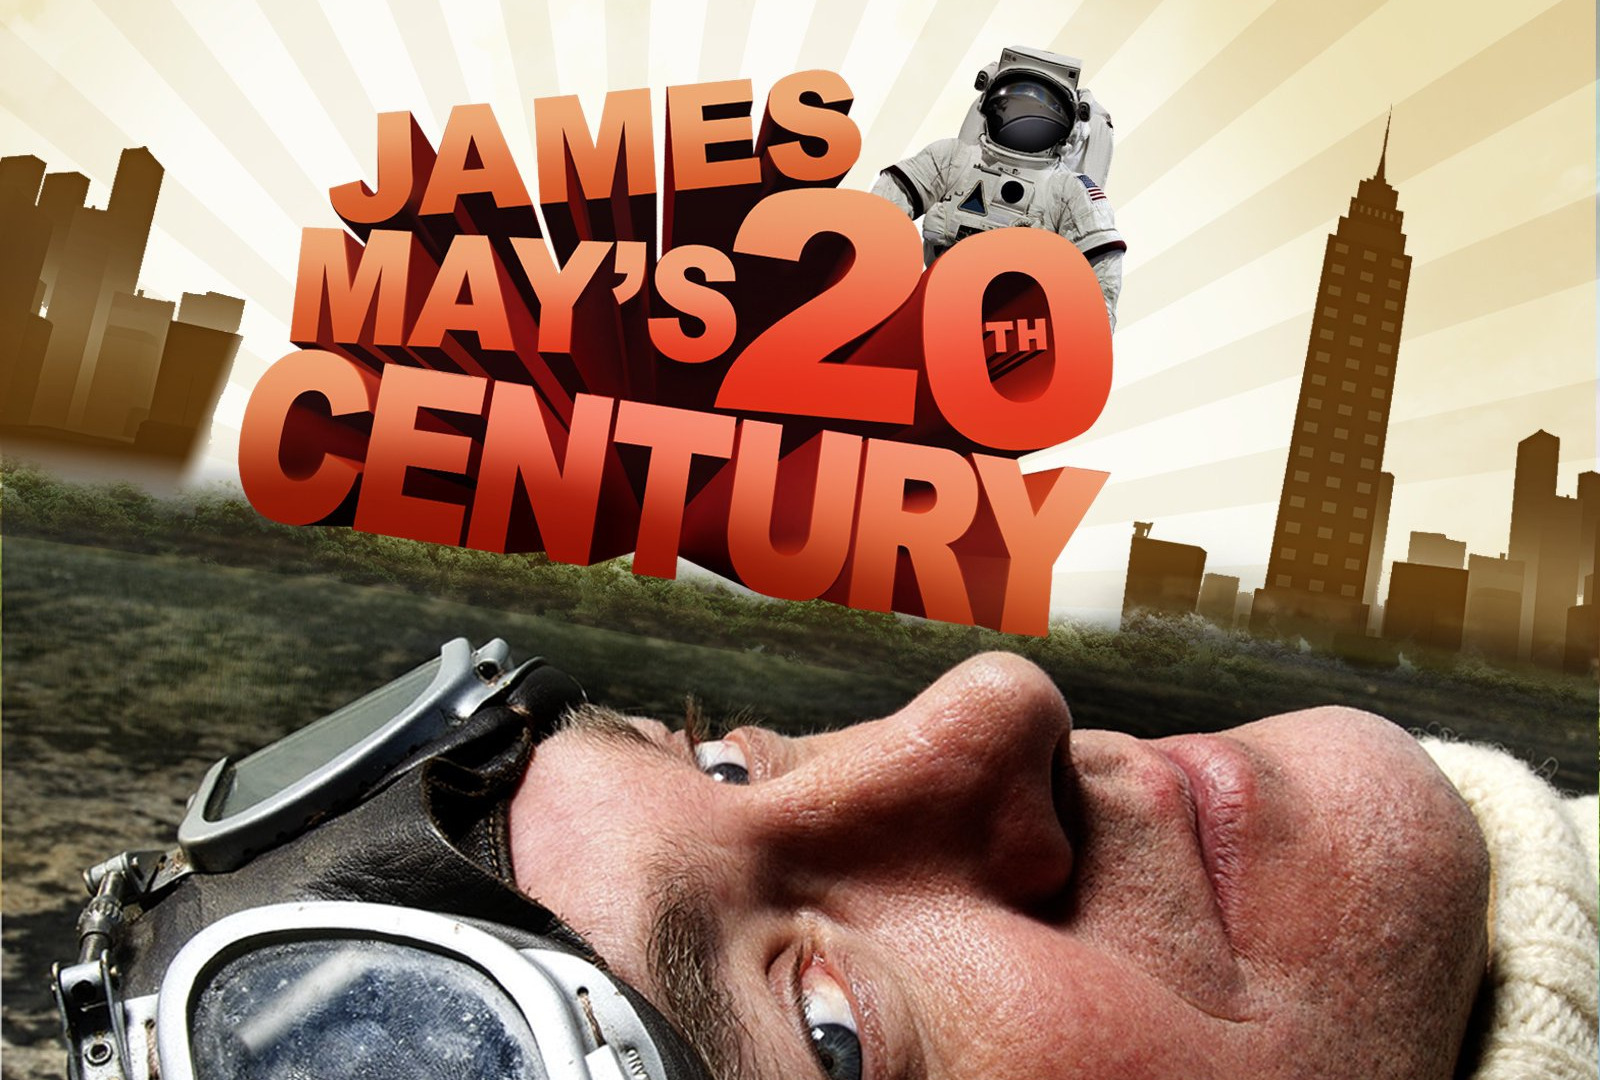 Show James May's 20th Century